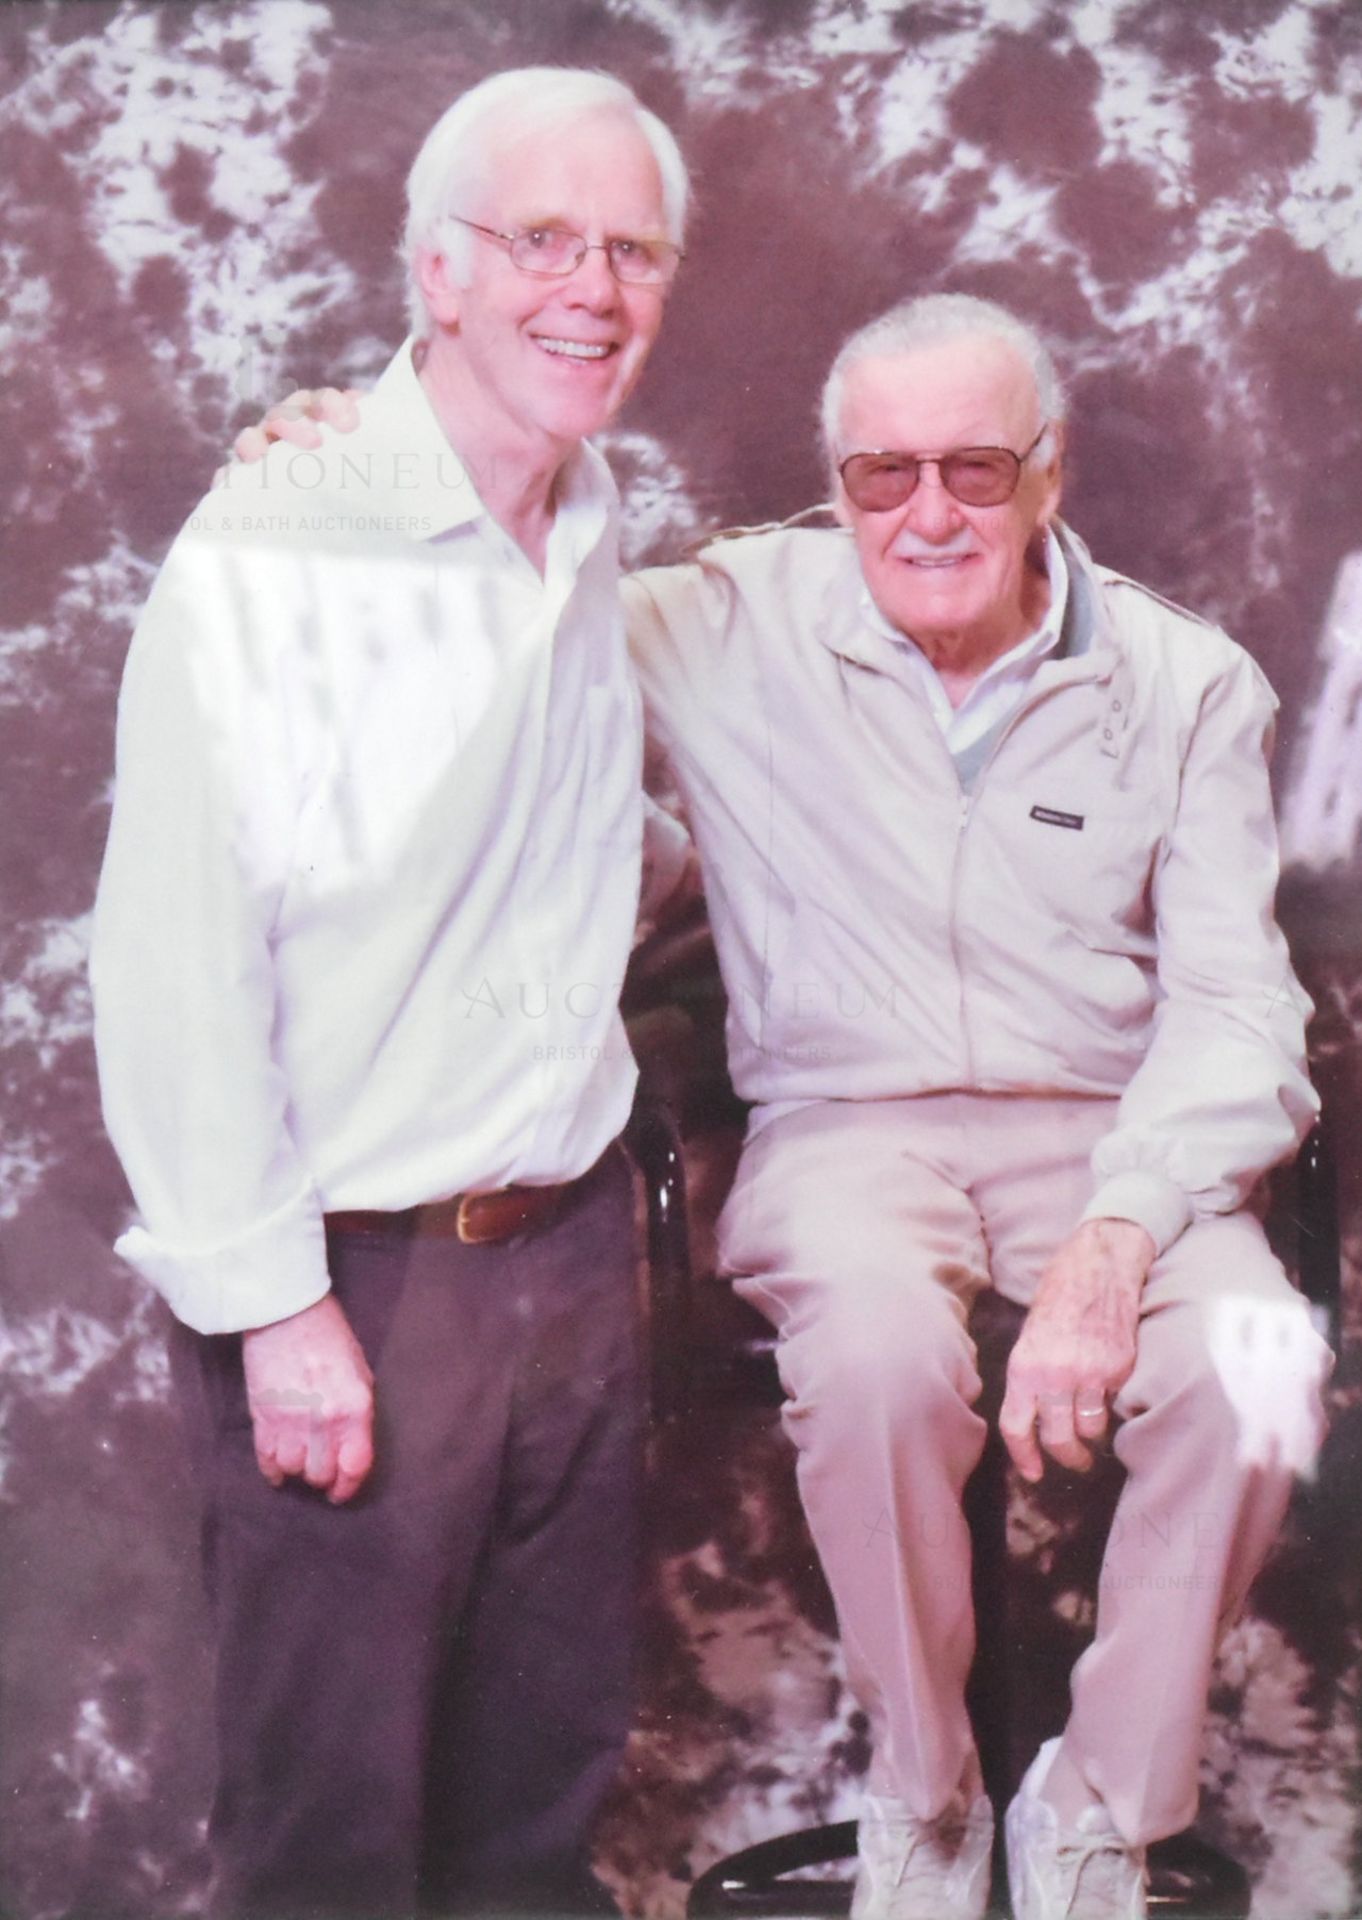 ESTATE OF JEREMY BULLOCH - STAN LEE (MARVEL) - PERSONAL PHOTOGRAPH - Image 2 of 2